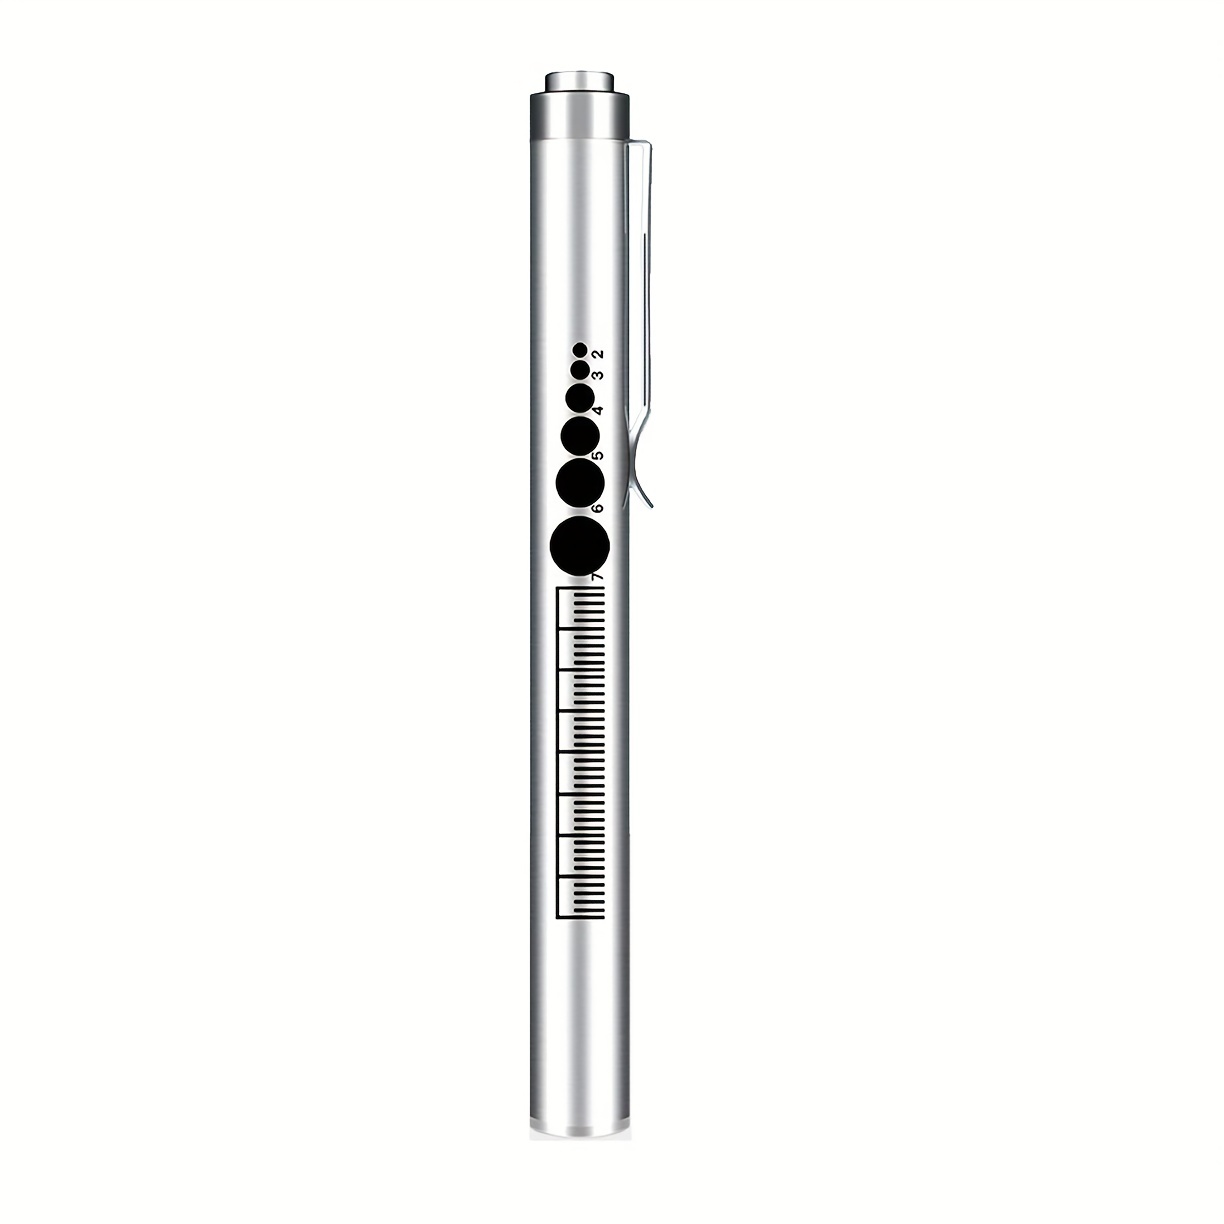 Dr care Nurse Led Medical Penlight with Pupil Gauge for Nursing Students  Doctors Black and Silver Torch (White yellow LIGHT) Smart Pen Price in  India - Buy Dr care Nurse Led Medical